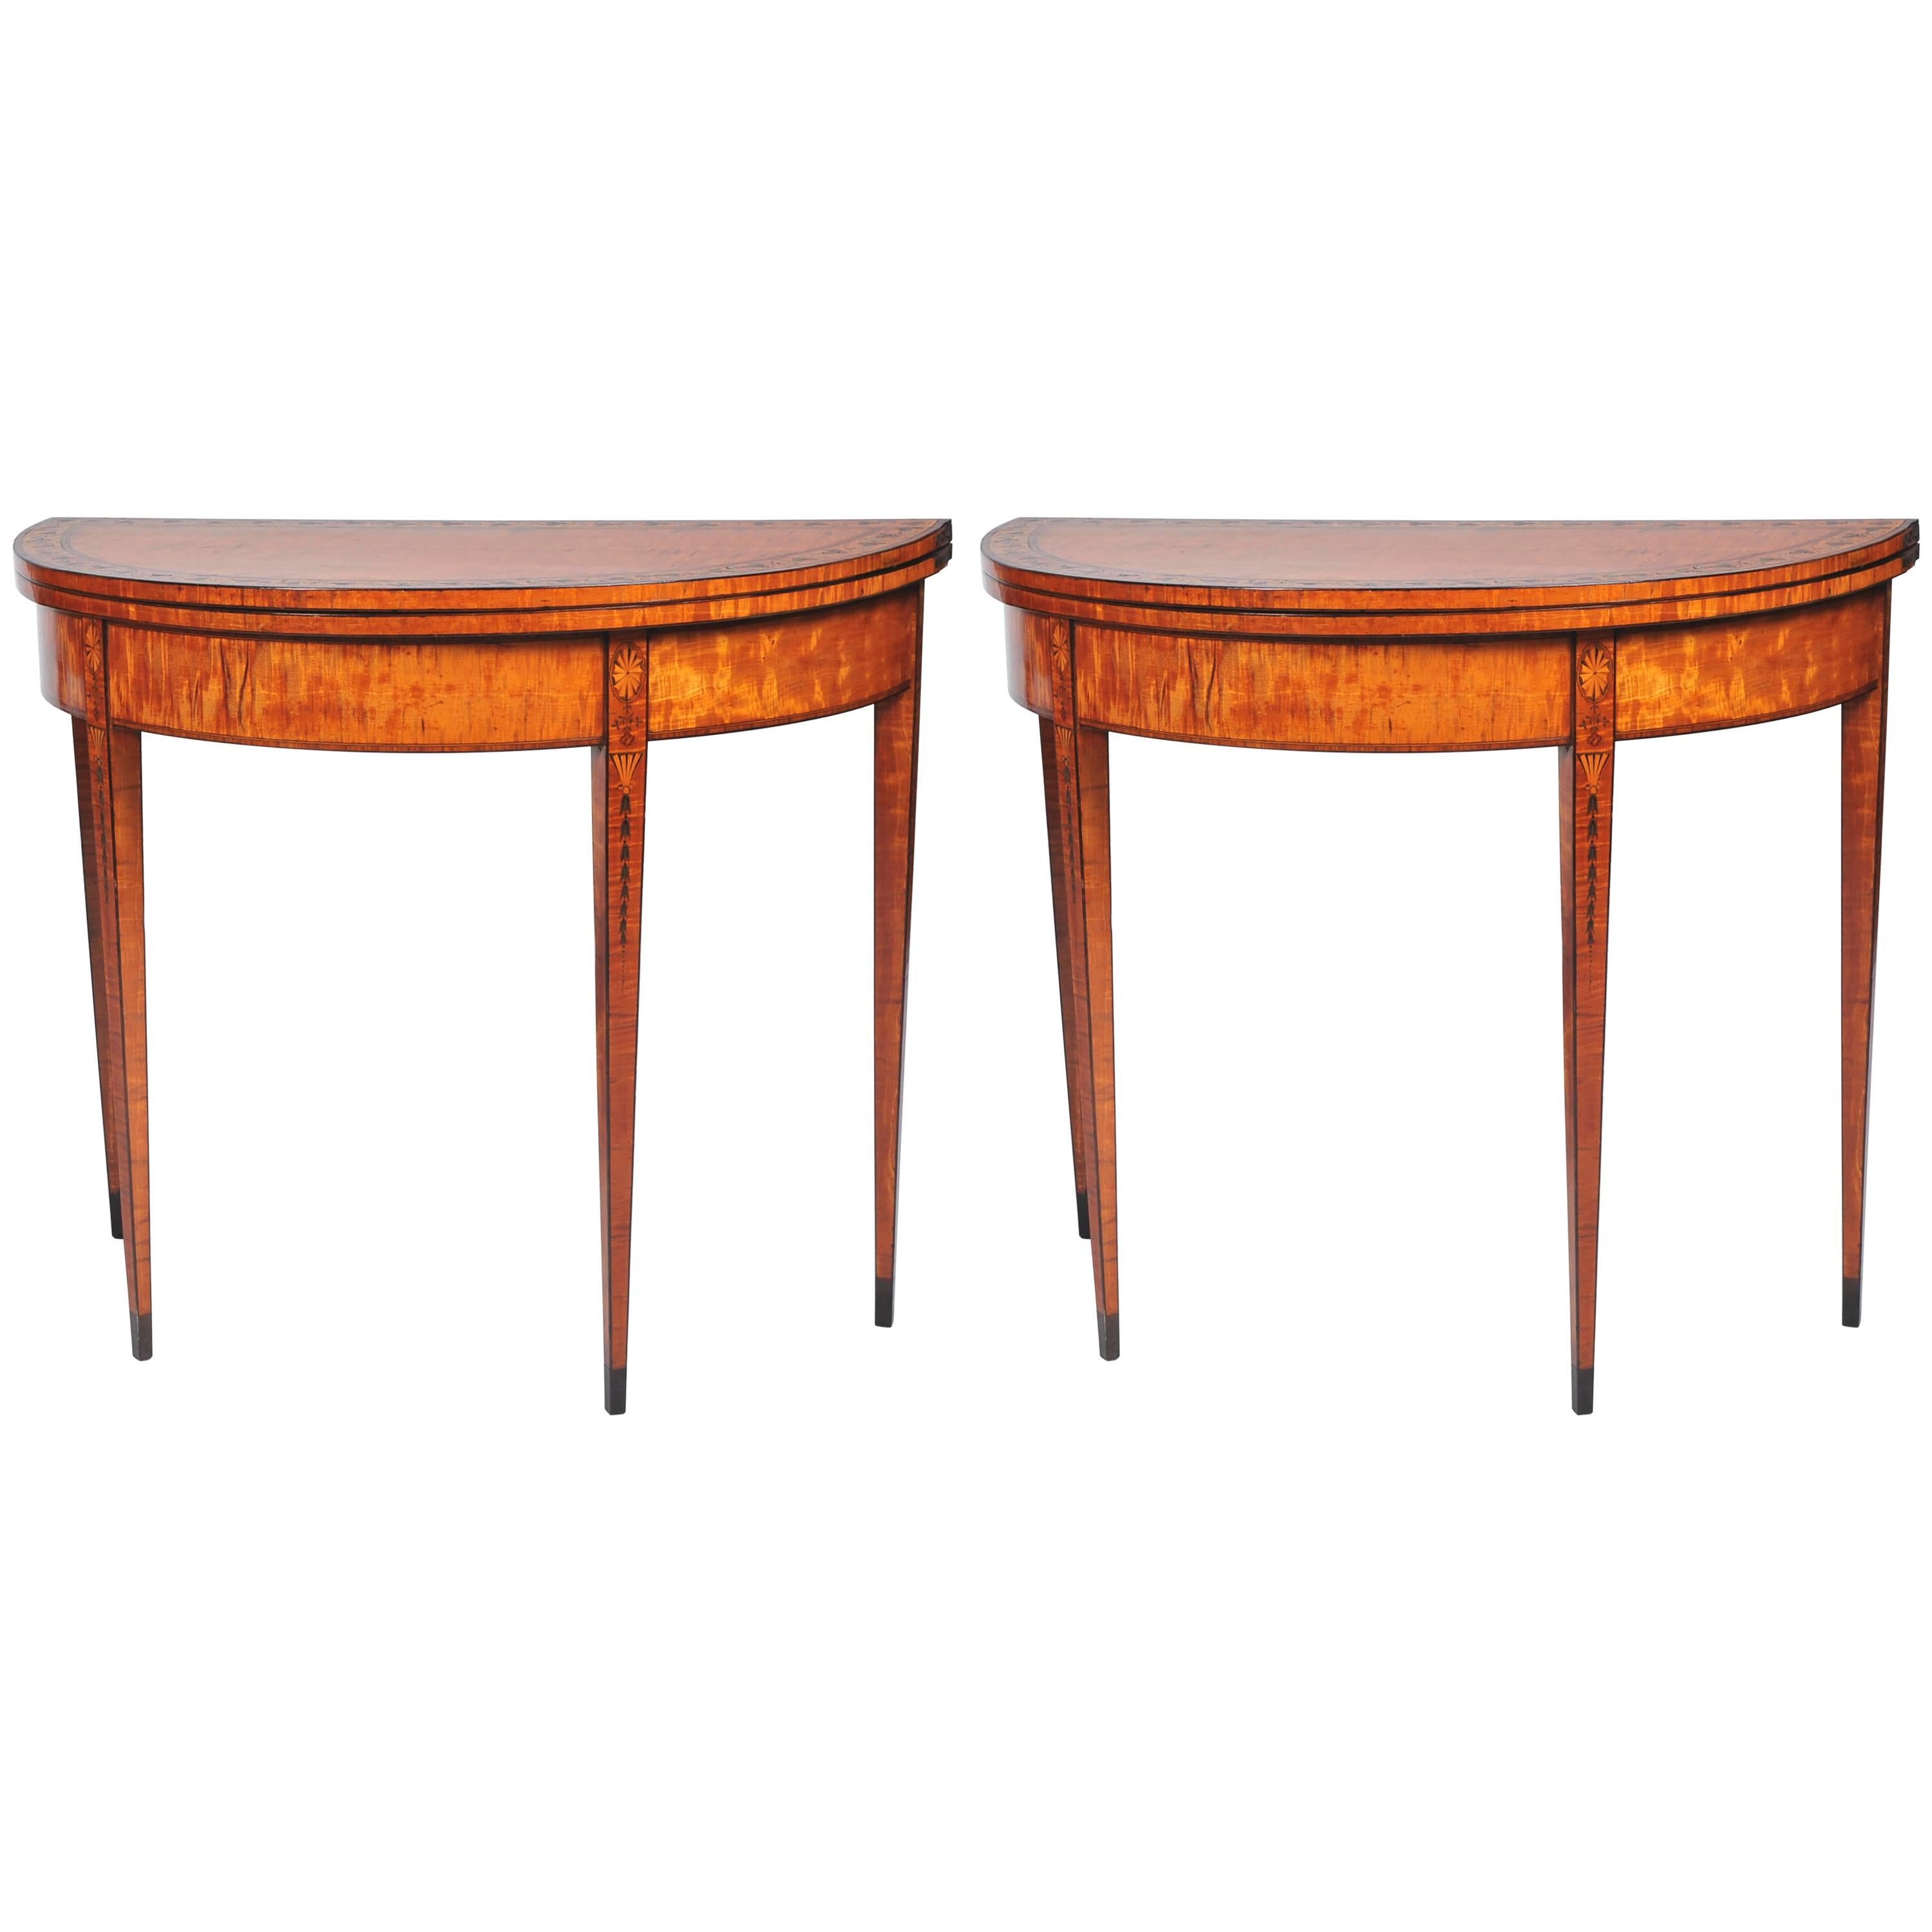 Pair of 18th Century Satinwood Card Tables